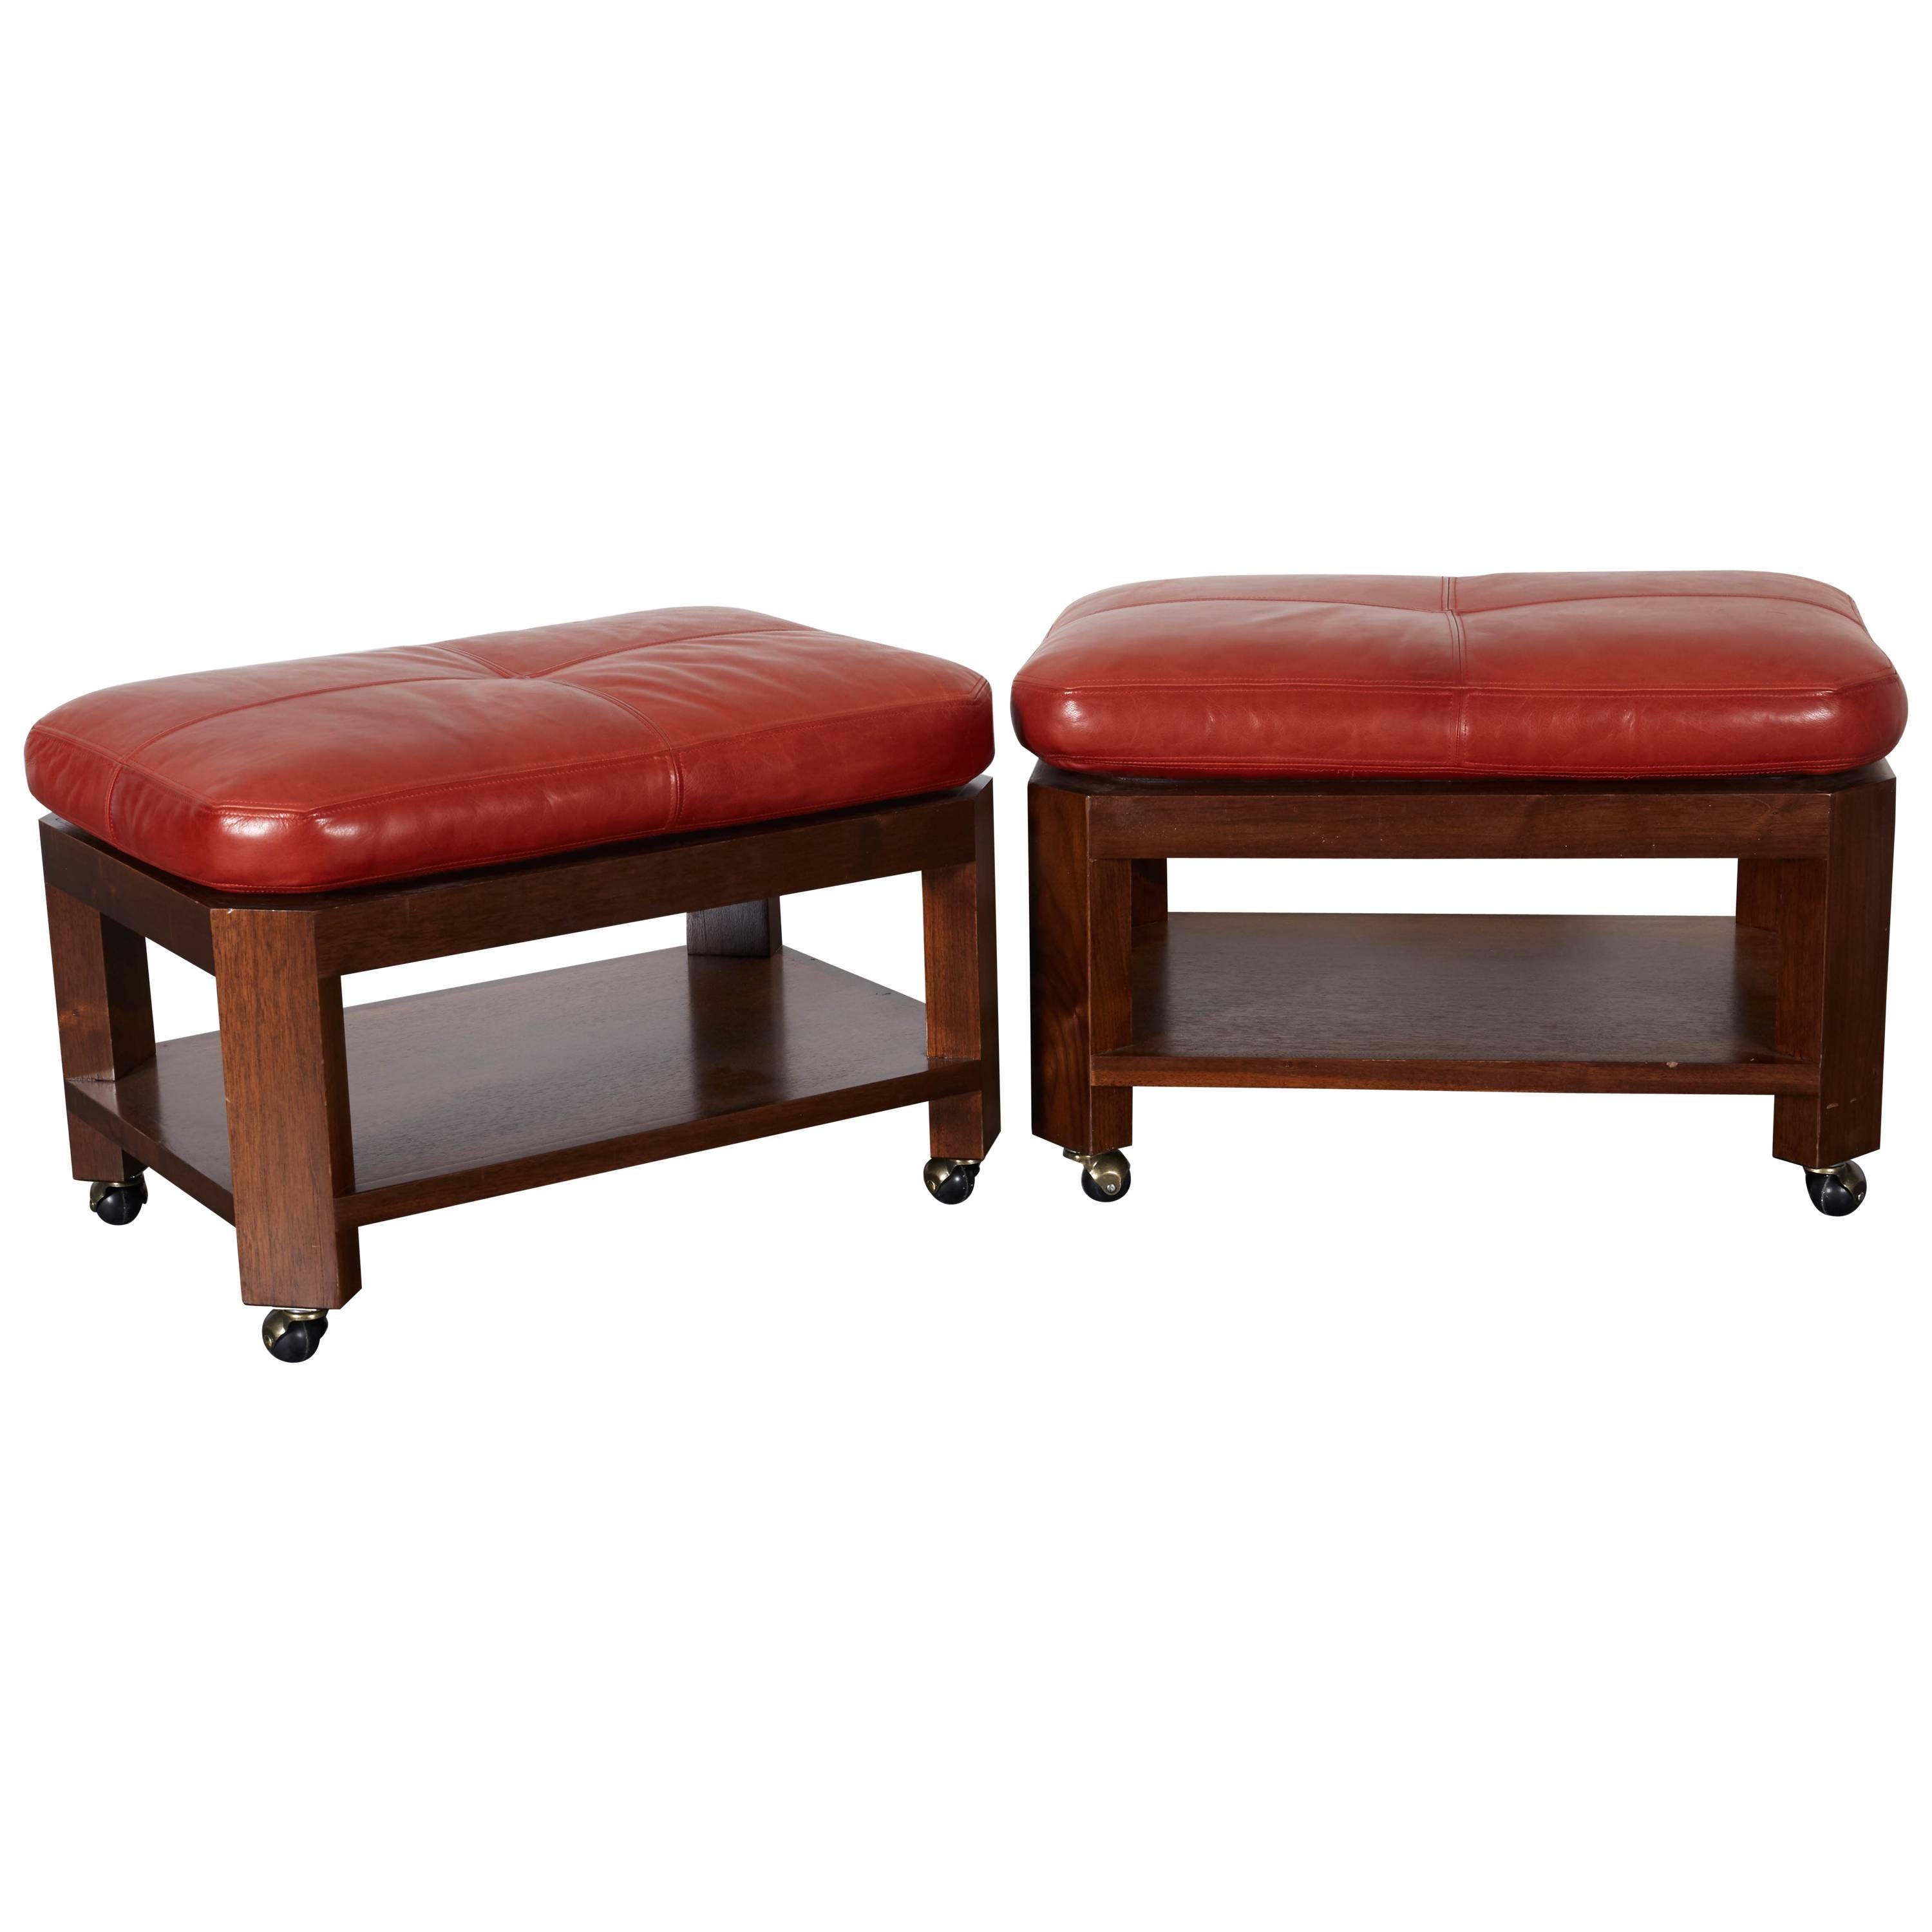 David Easton Brick Red Leather and Walnut Benches